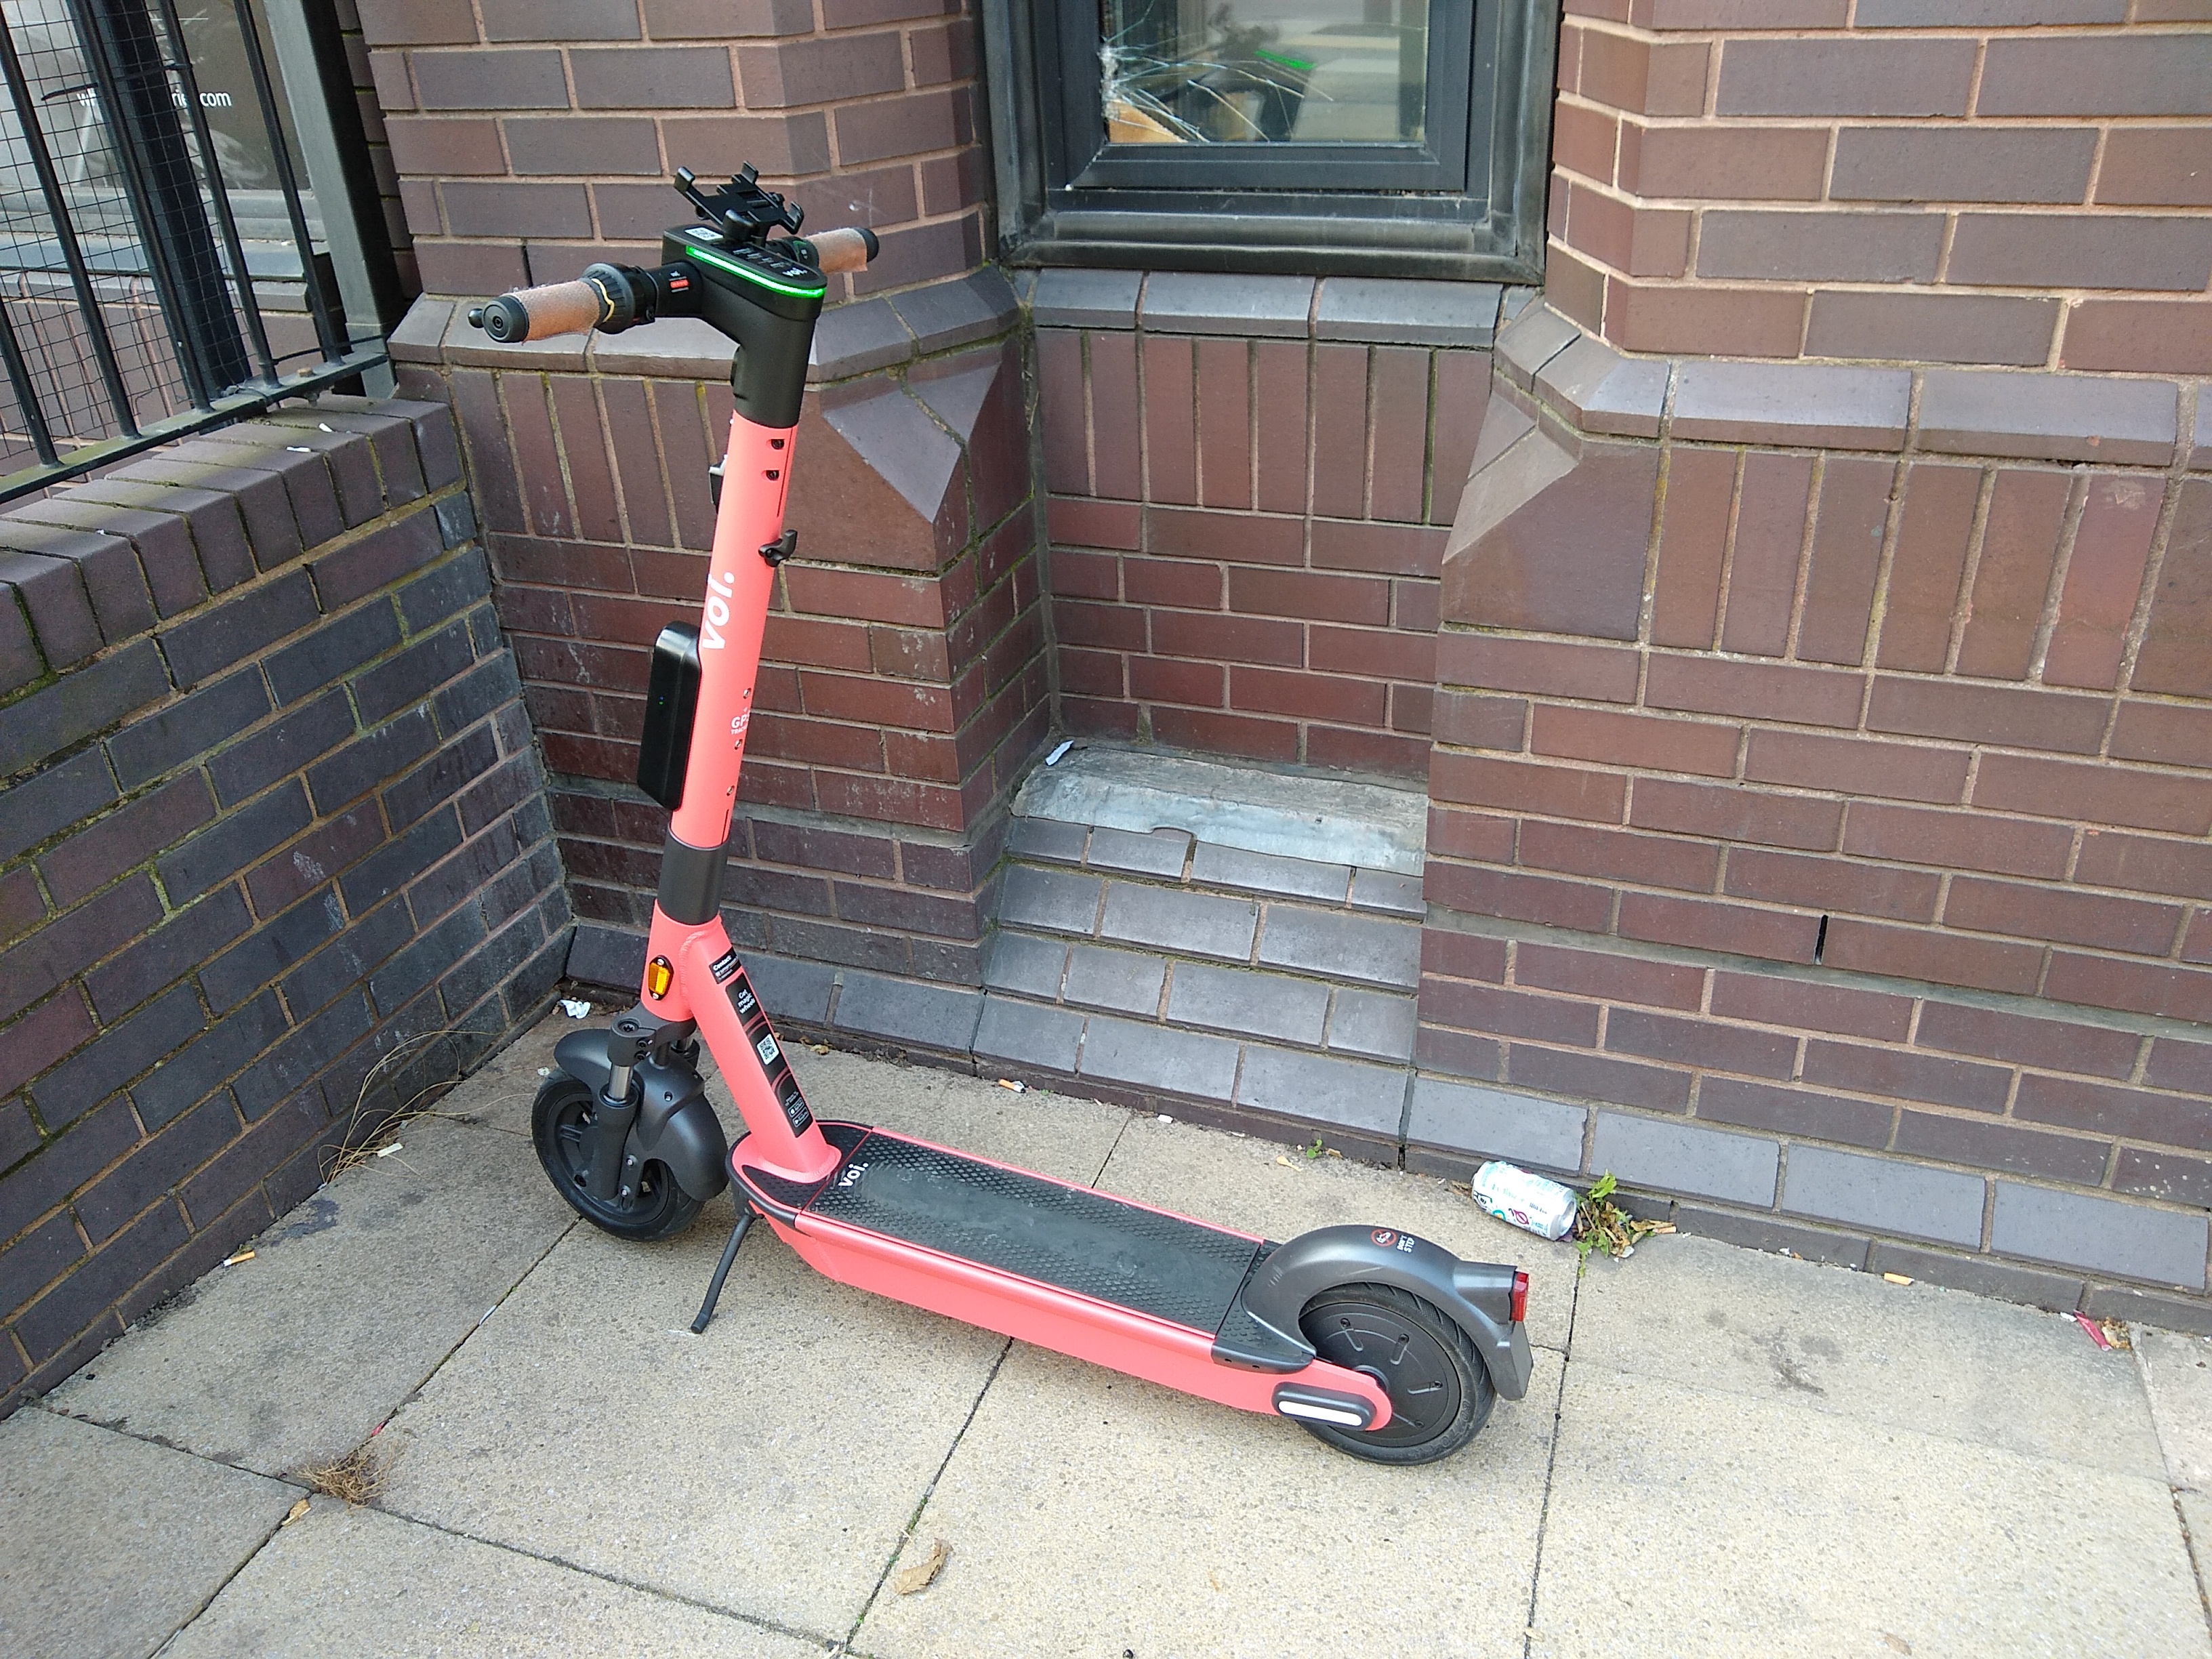 Voi electric hire scooter parked against a wall